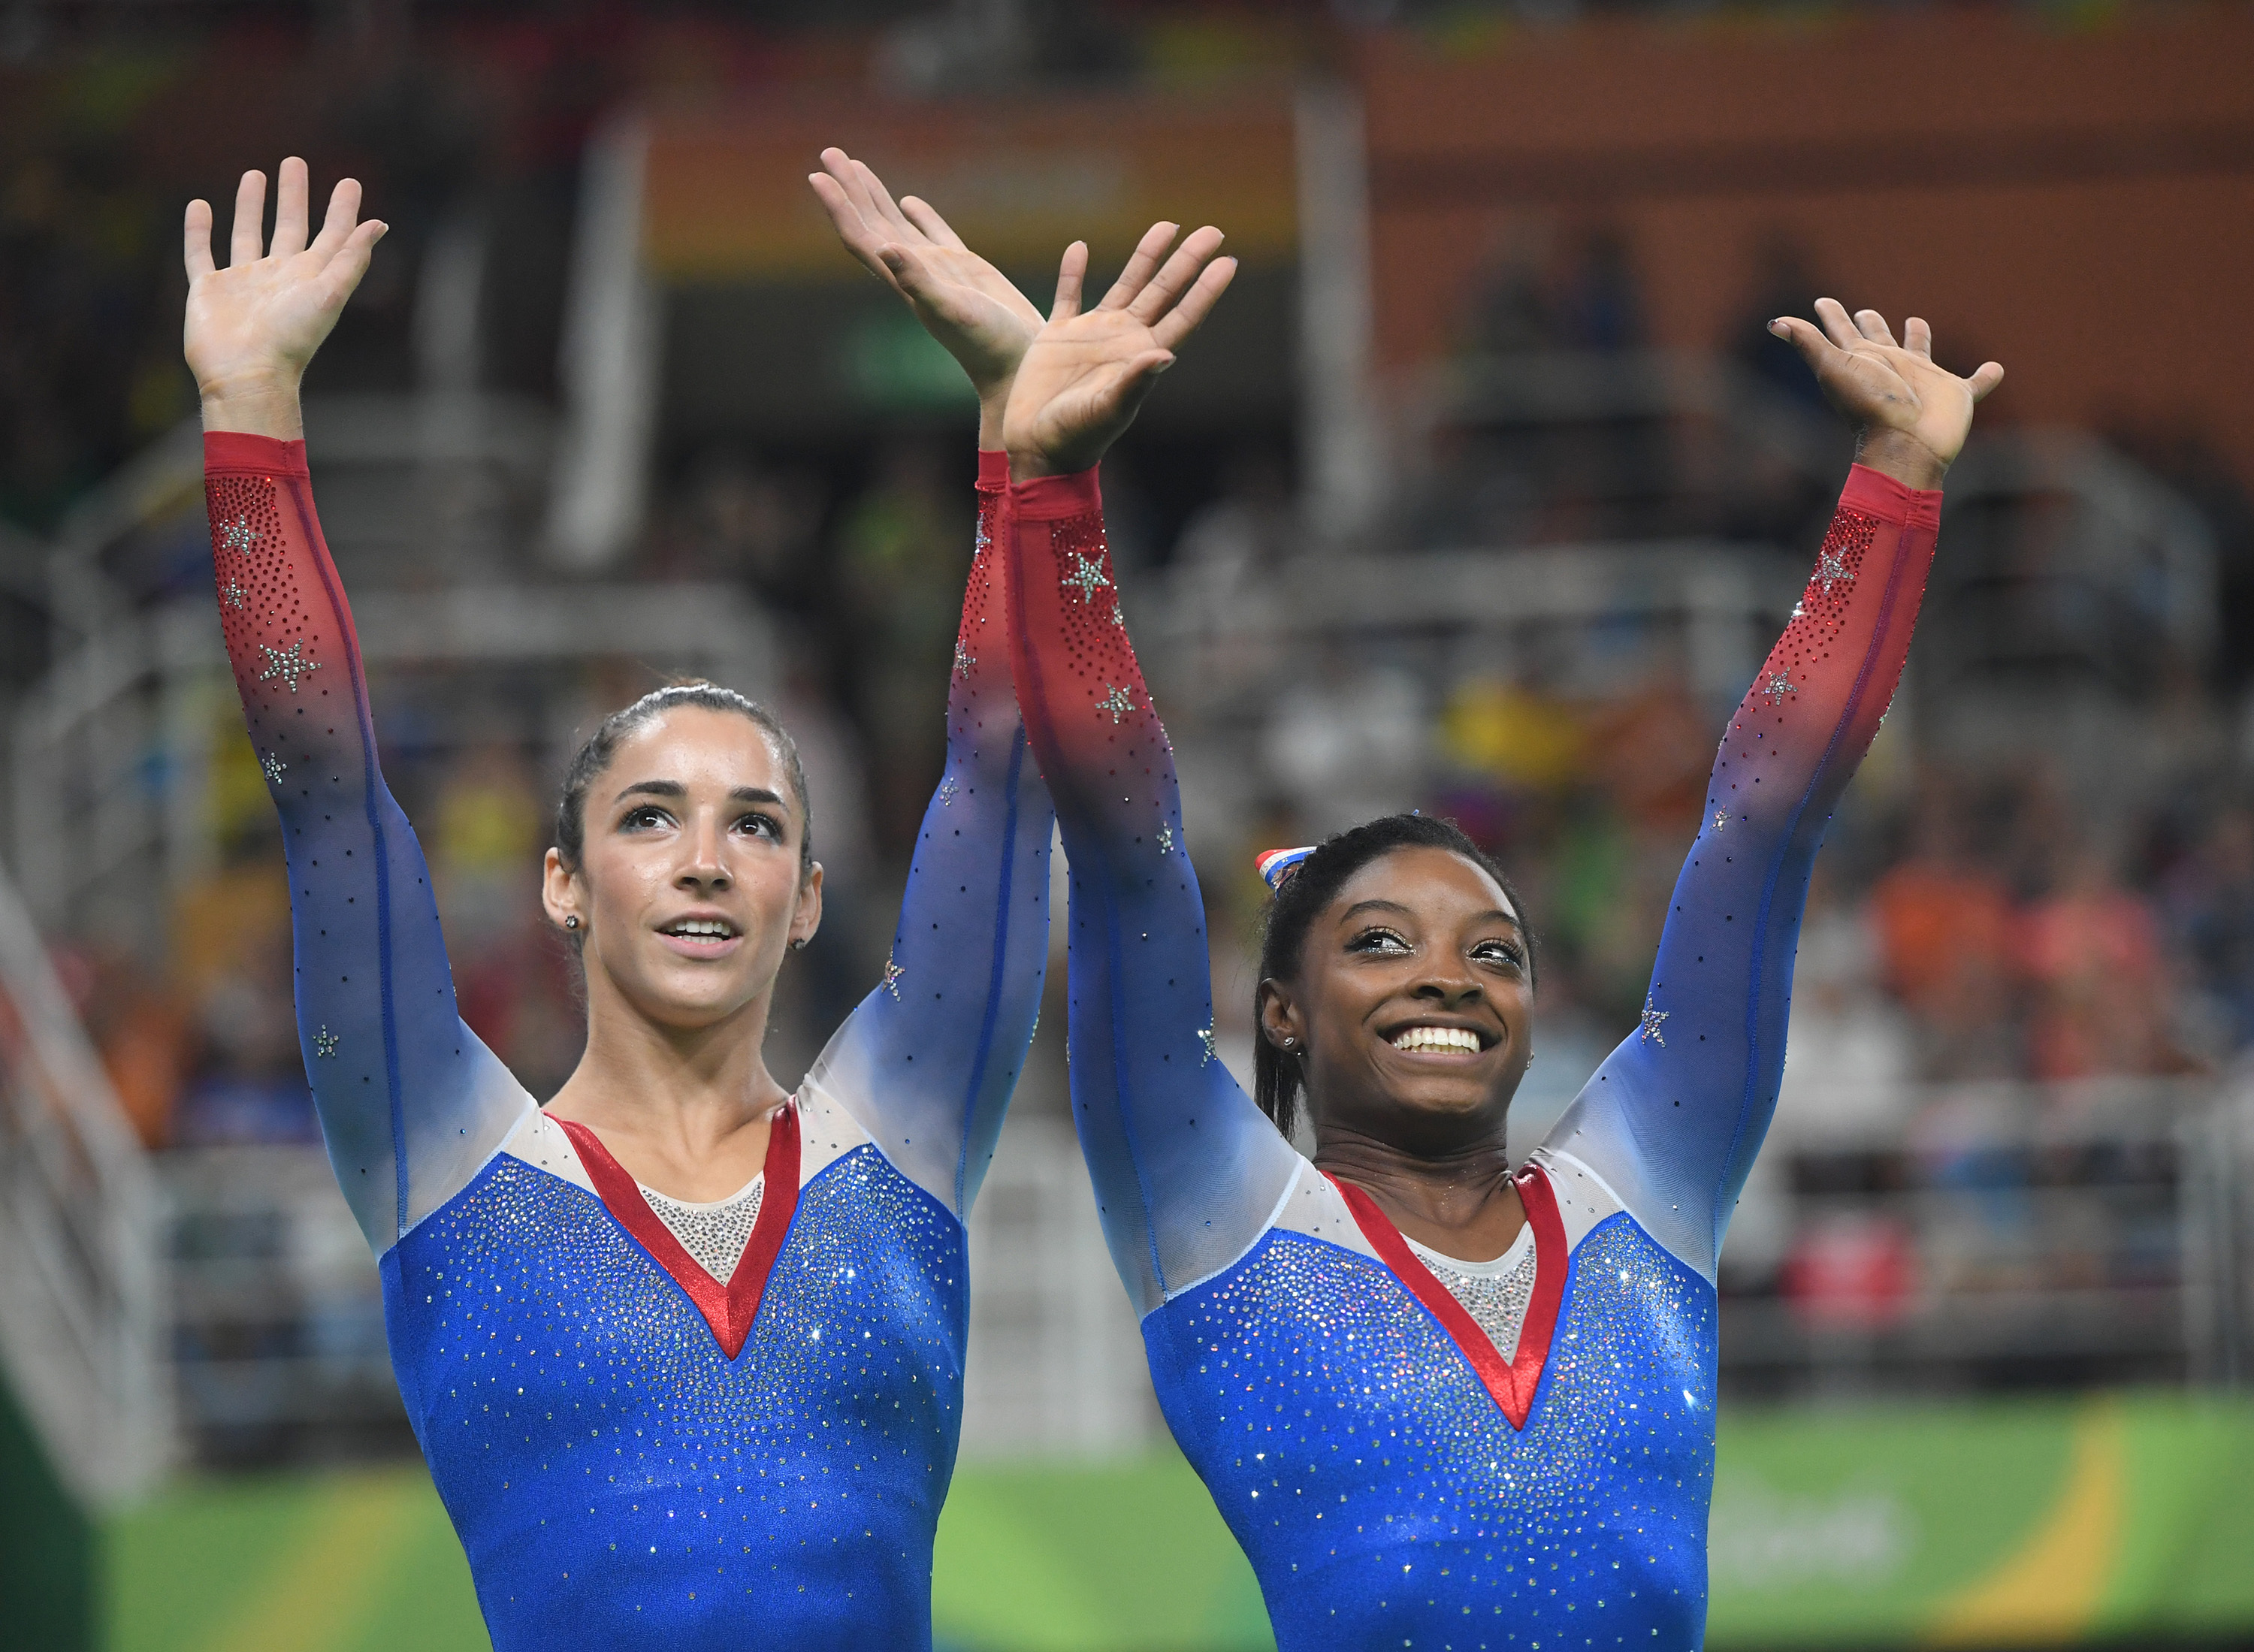 Simone Biles’ response to abuse is as graceful and courageous as her gymnastics